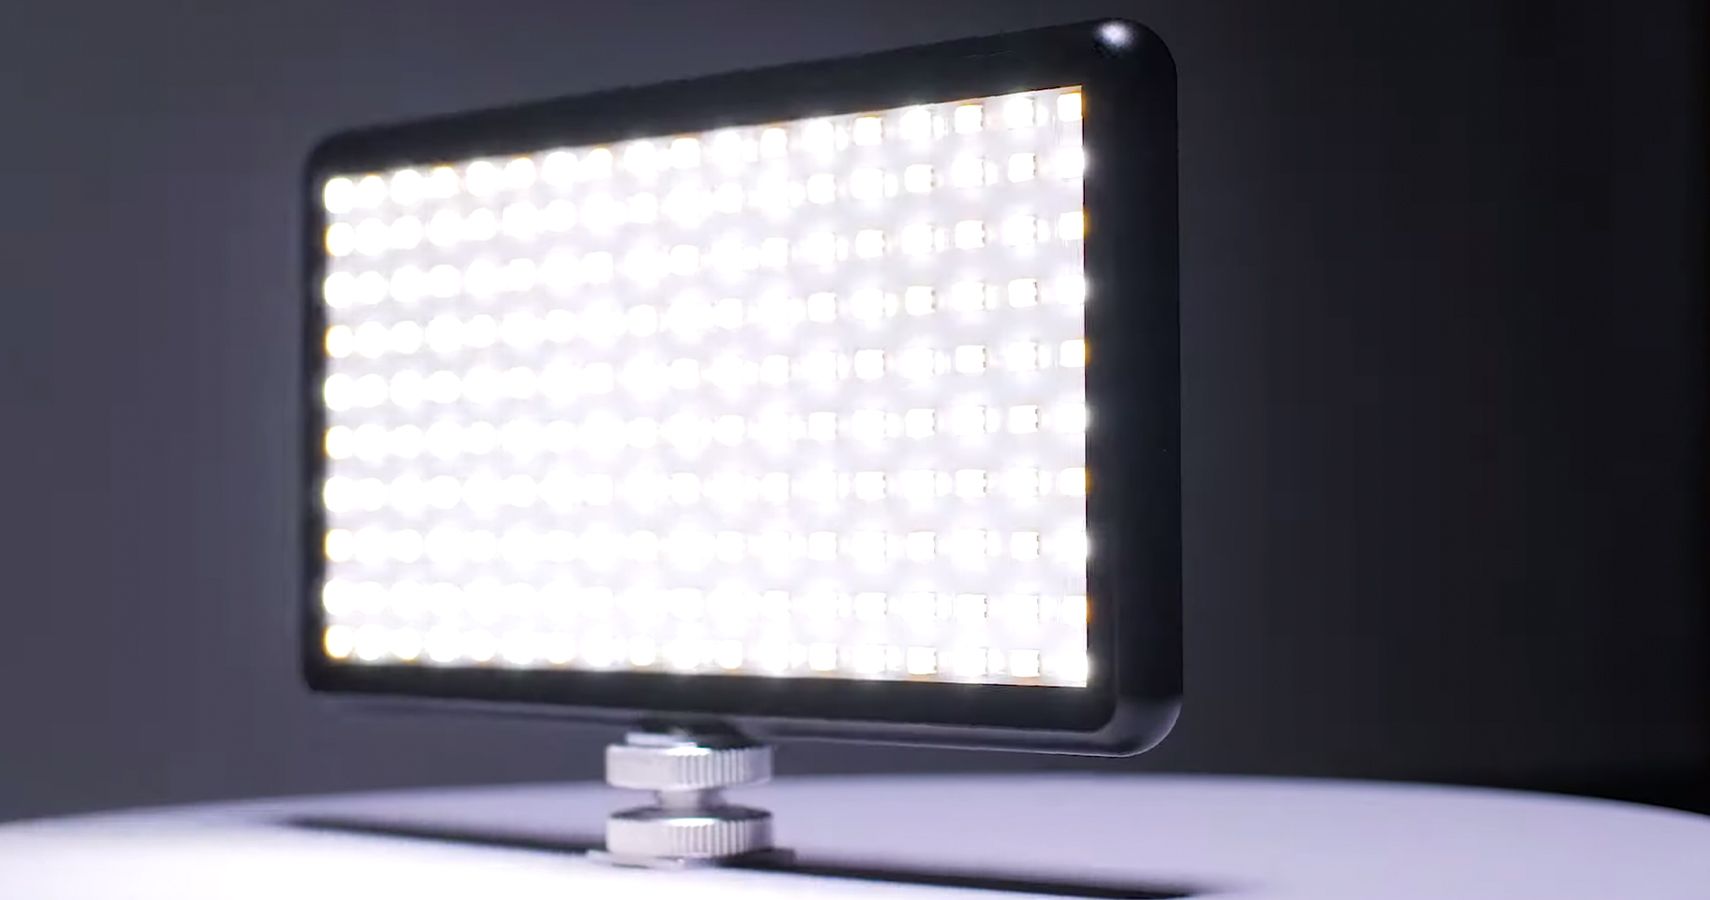 Lume Cube LED Light Panel Review A Bright Way To Improve Video Image Quality